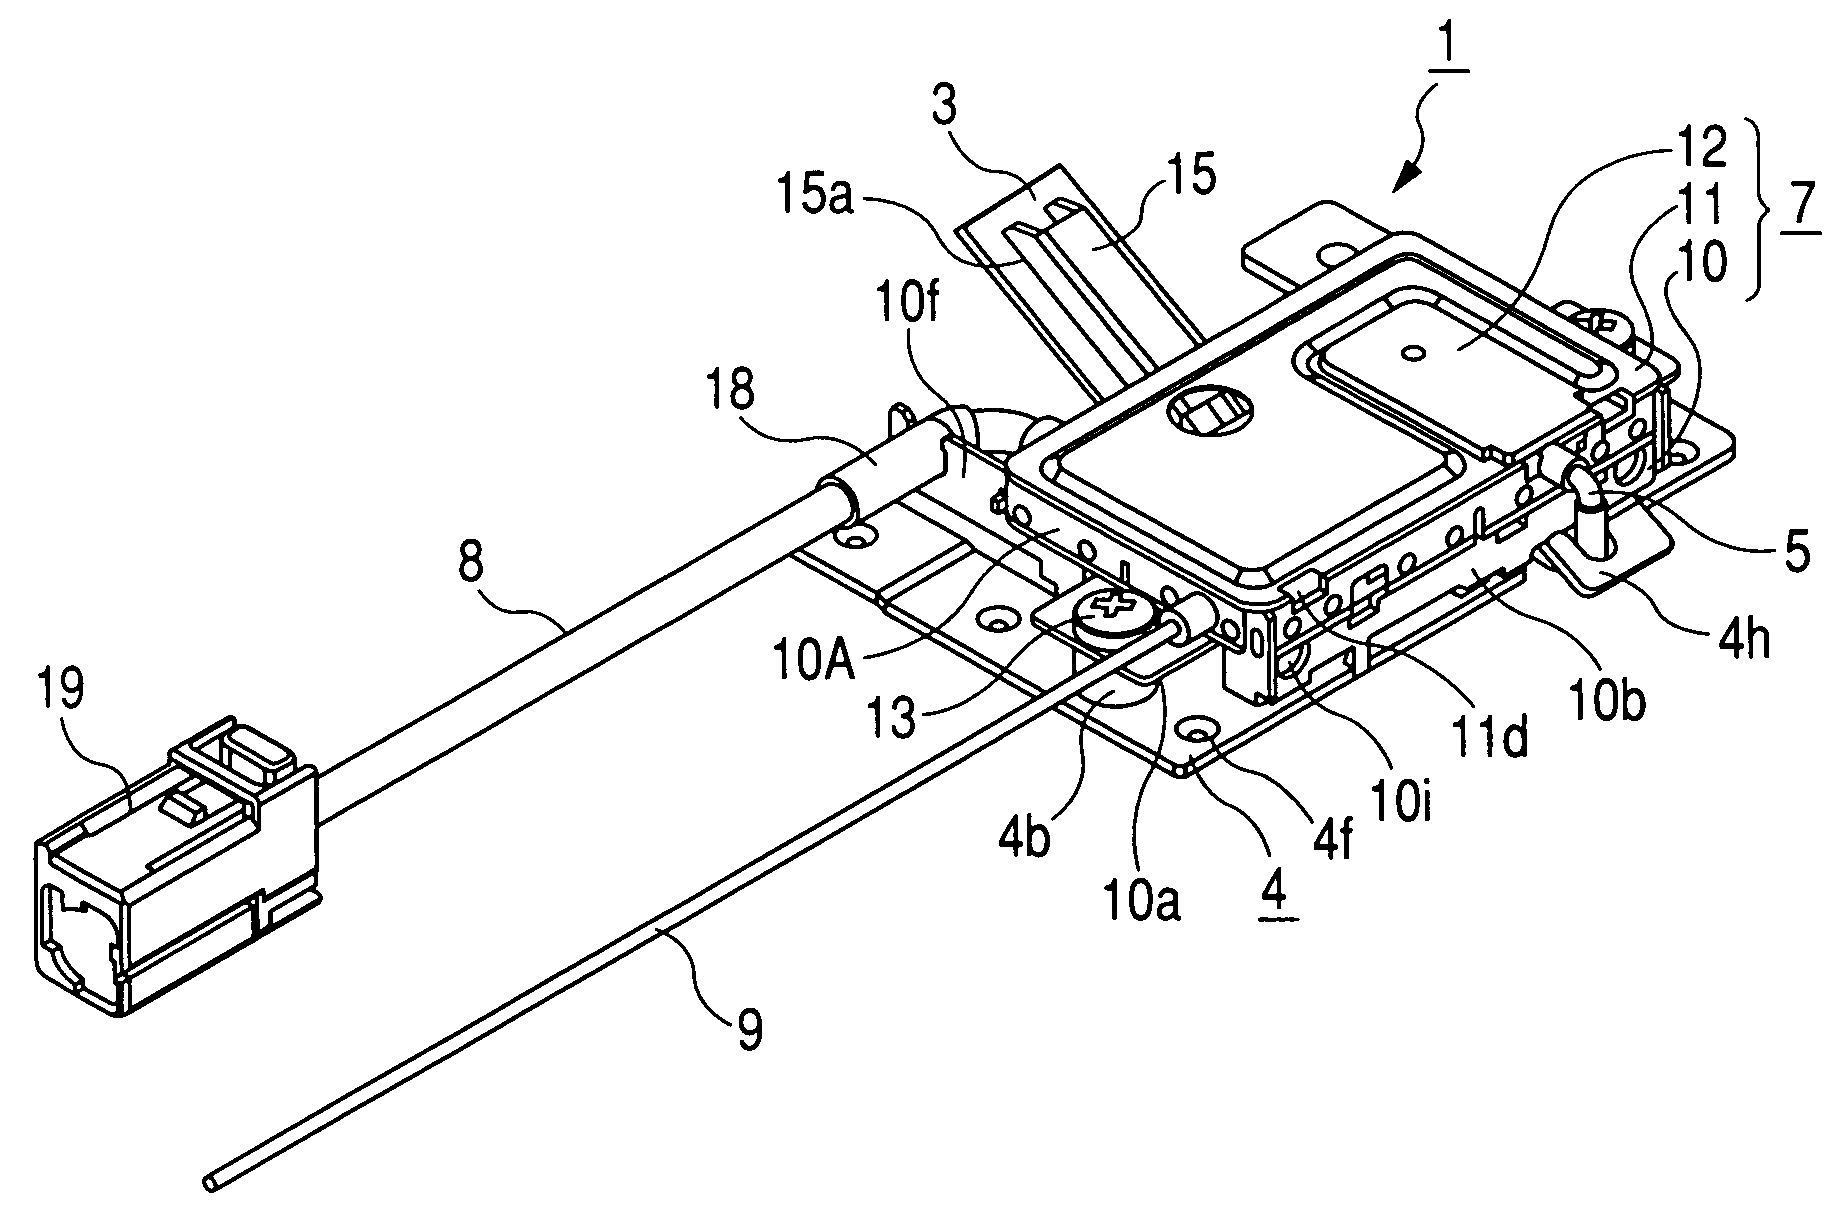 Wiring structure of vehicle-mounted antenna system